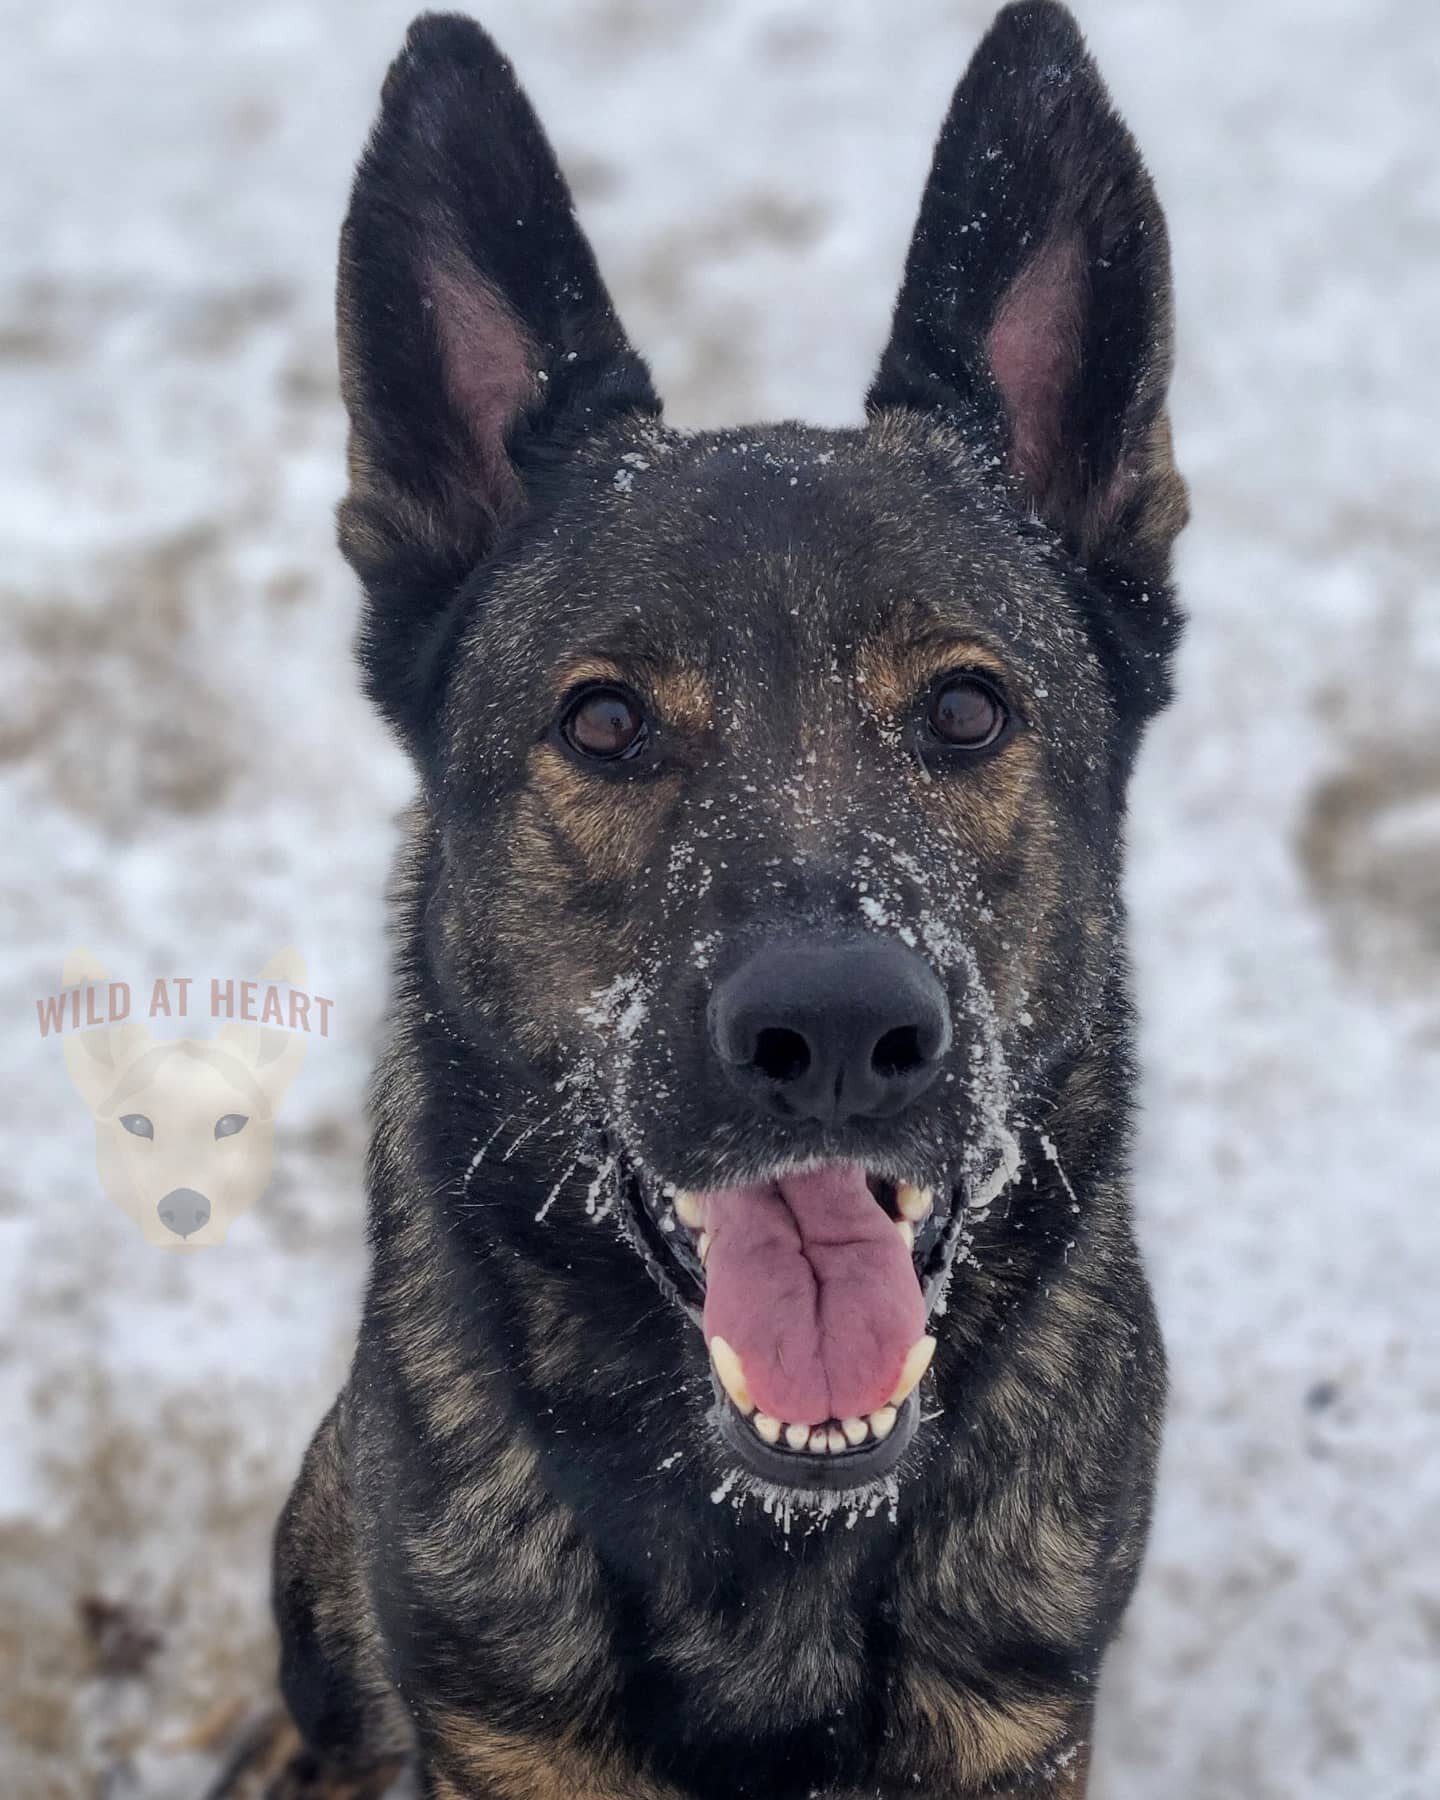 ❄ Texas got snow?! ❄

 Dogs in Texas are used to warmer temperatures, so this chilly winter can really throw them for a loop! 

Here are a few tips to help them adjust to snow and cold temperatures! 

🌨 Take multiple breaks and don't stay out long e